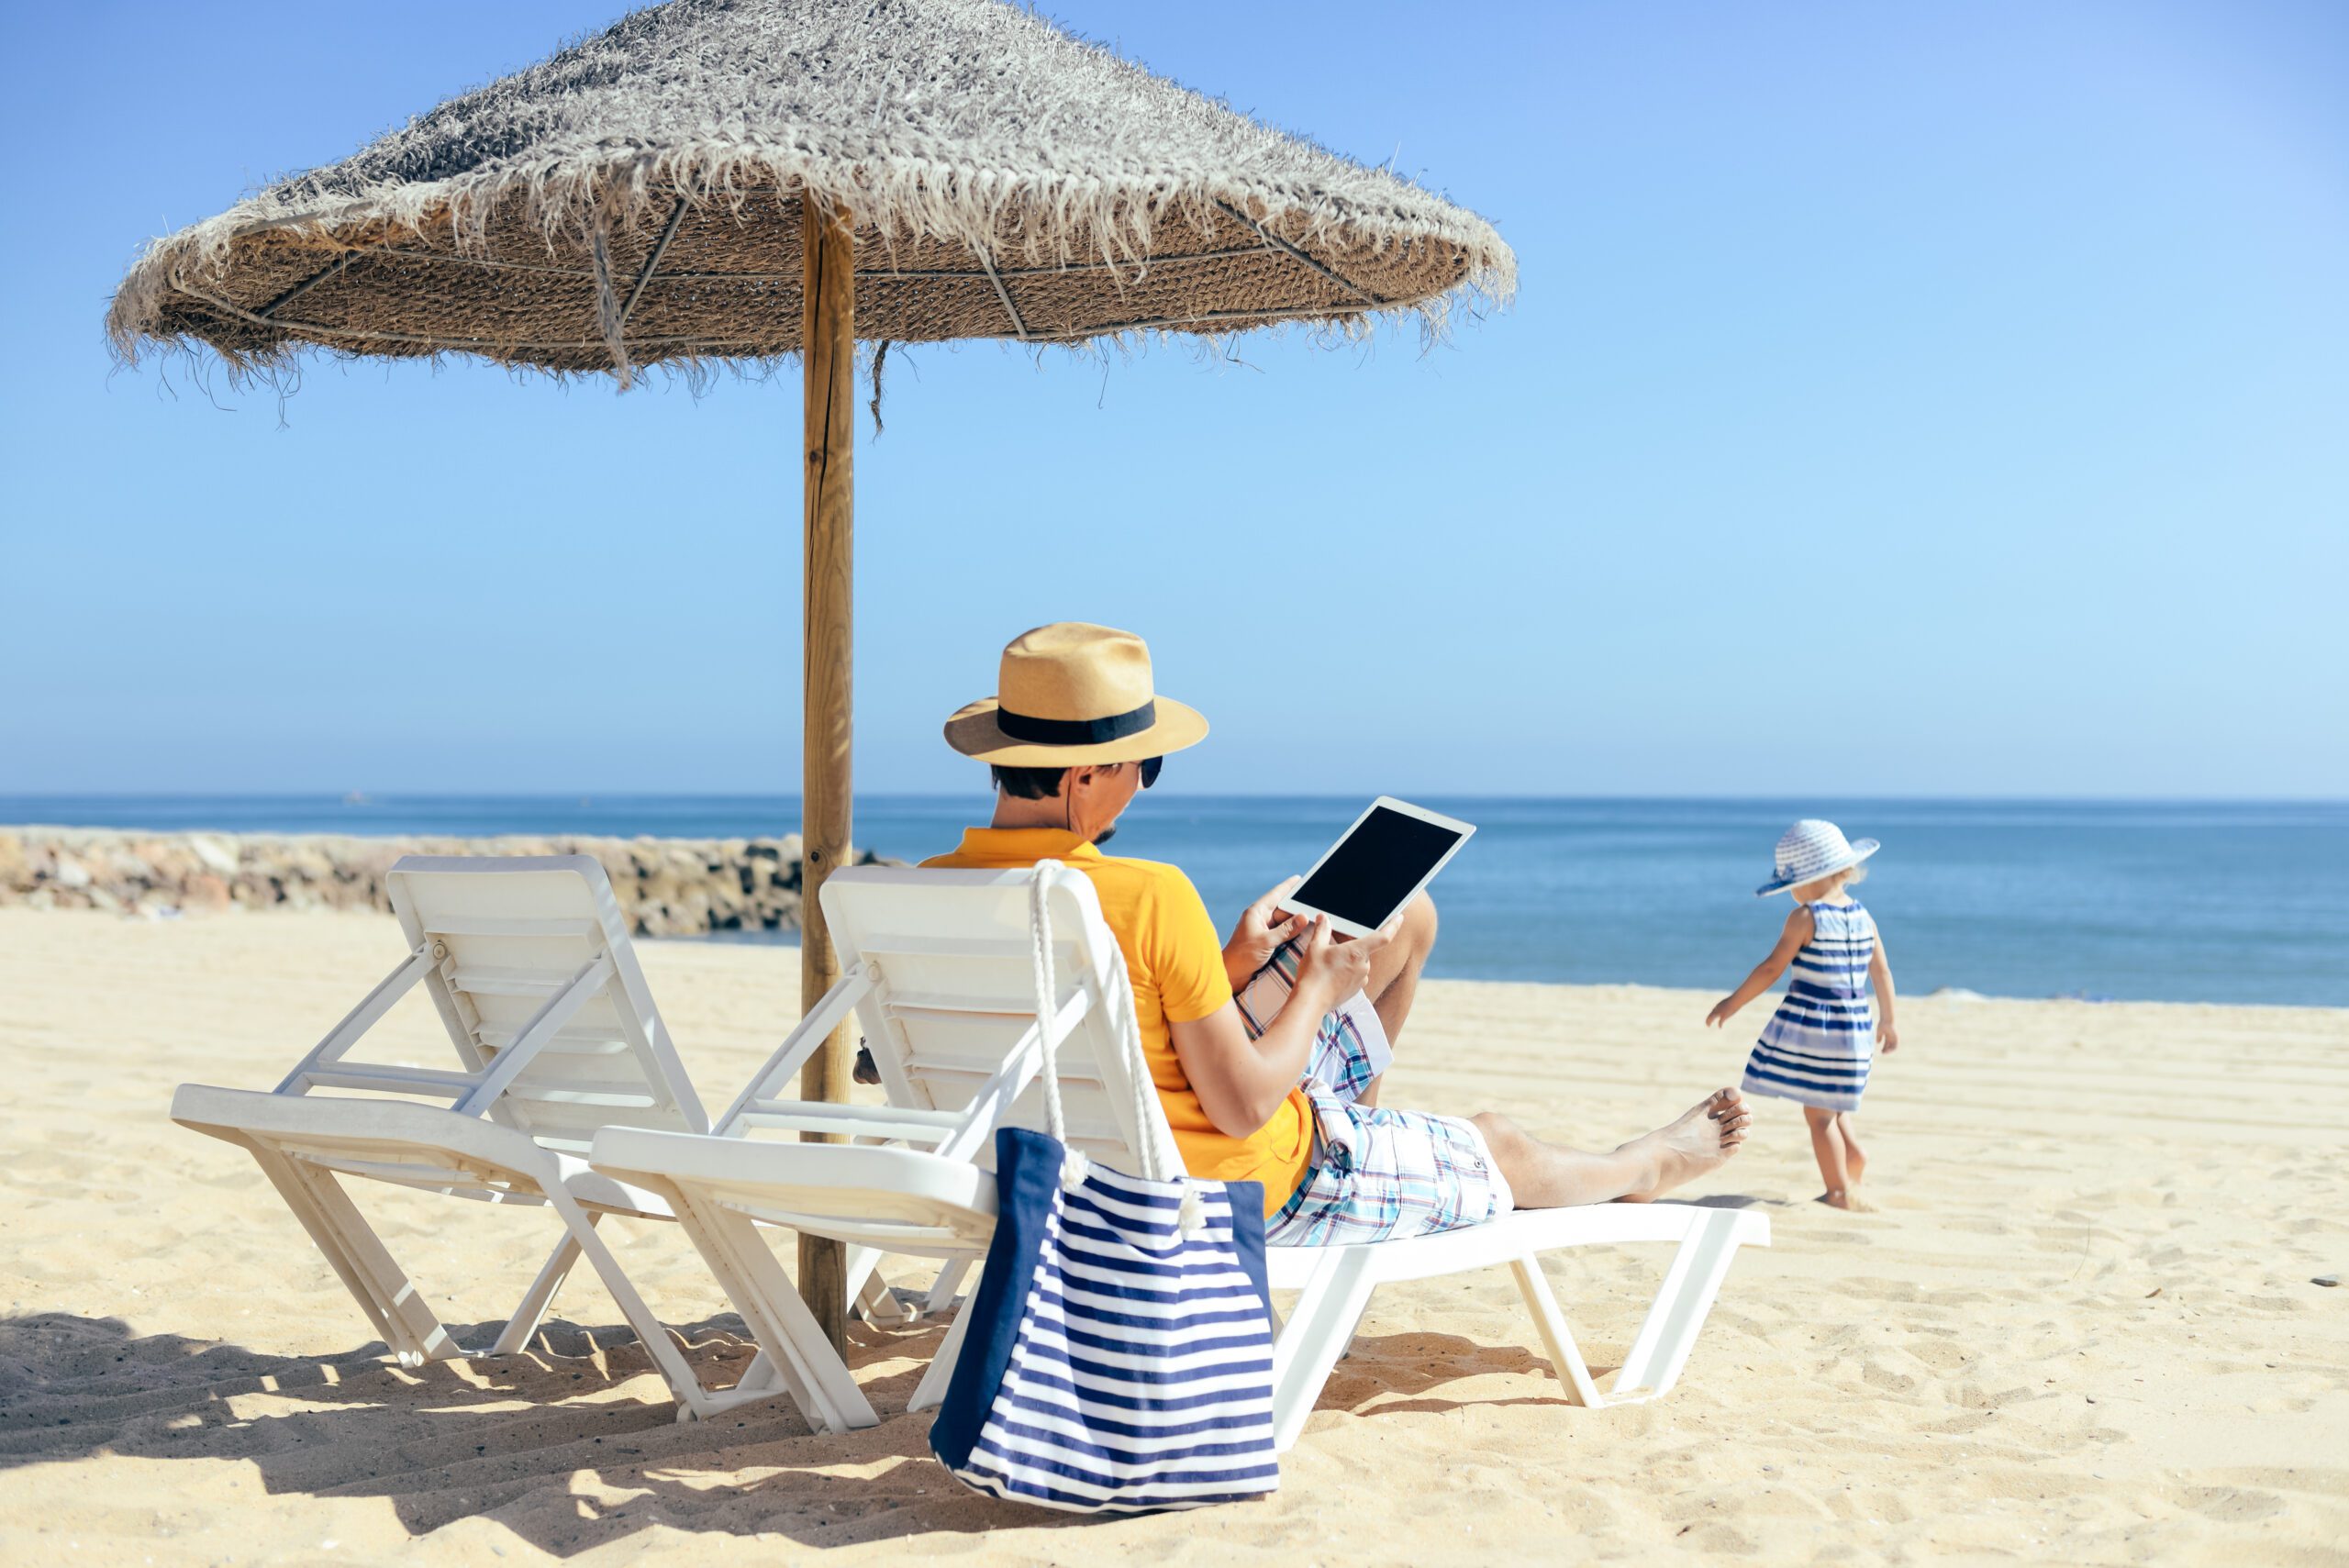 Use the summer downtime to set a new goal – from your deckchair